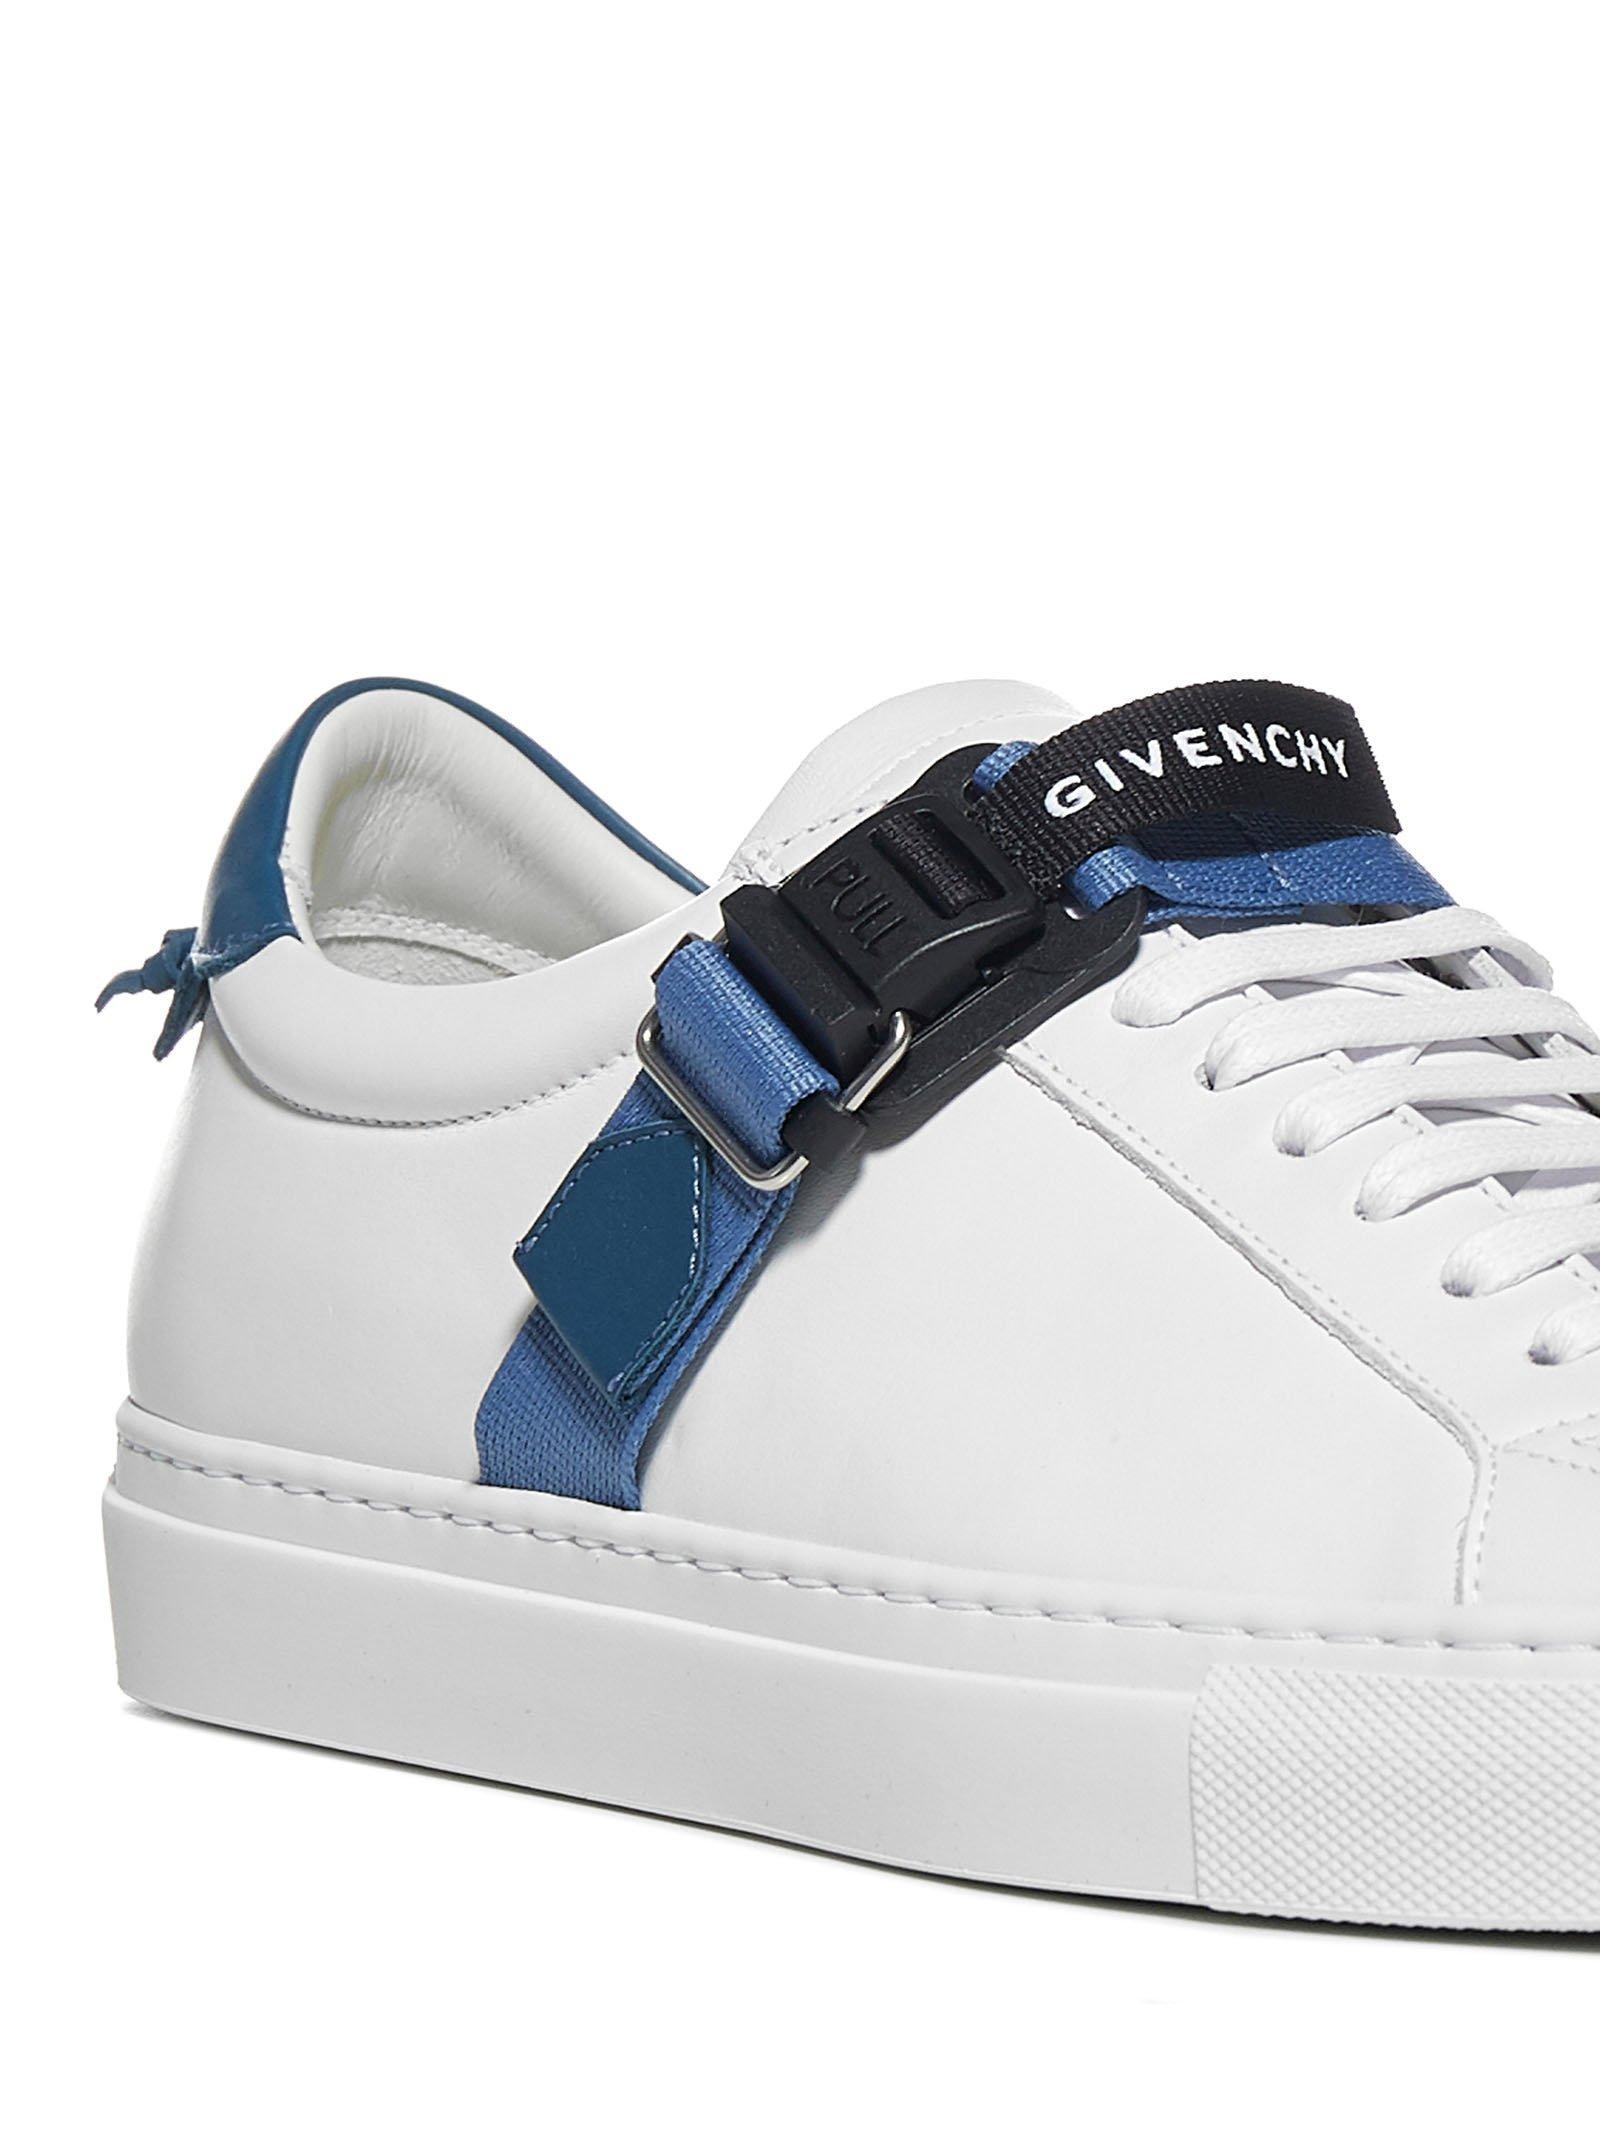 slidbane Mos vene Givenchy Urban Street Strap-detail Leather Sneakers in Blue for Men | Lyst